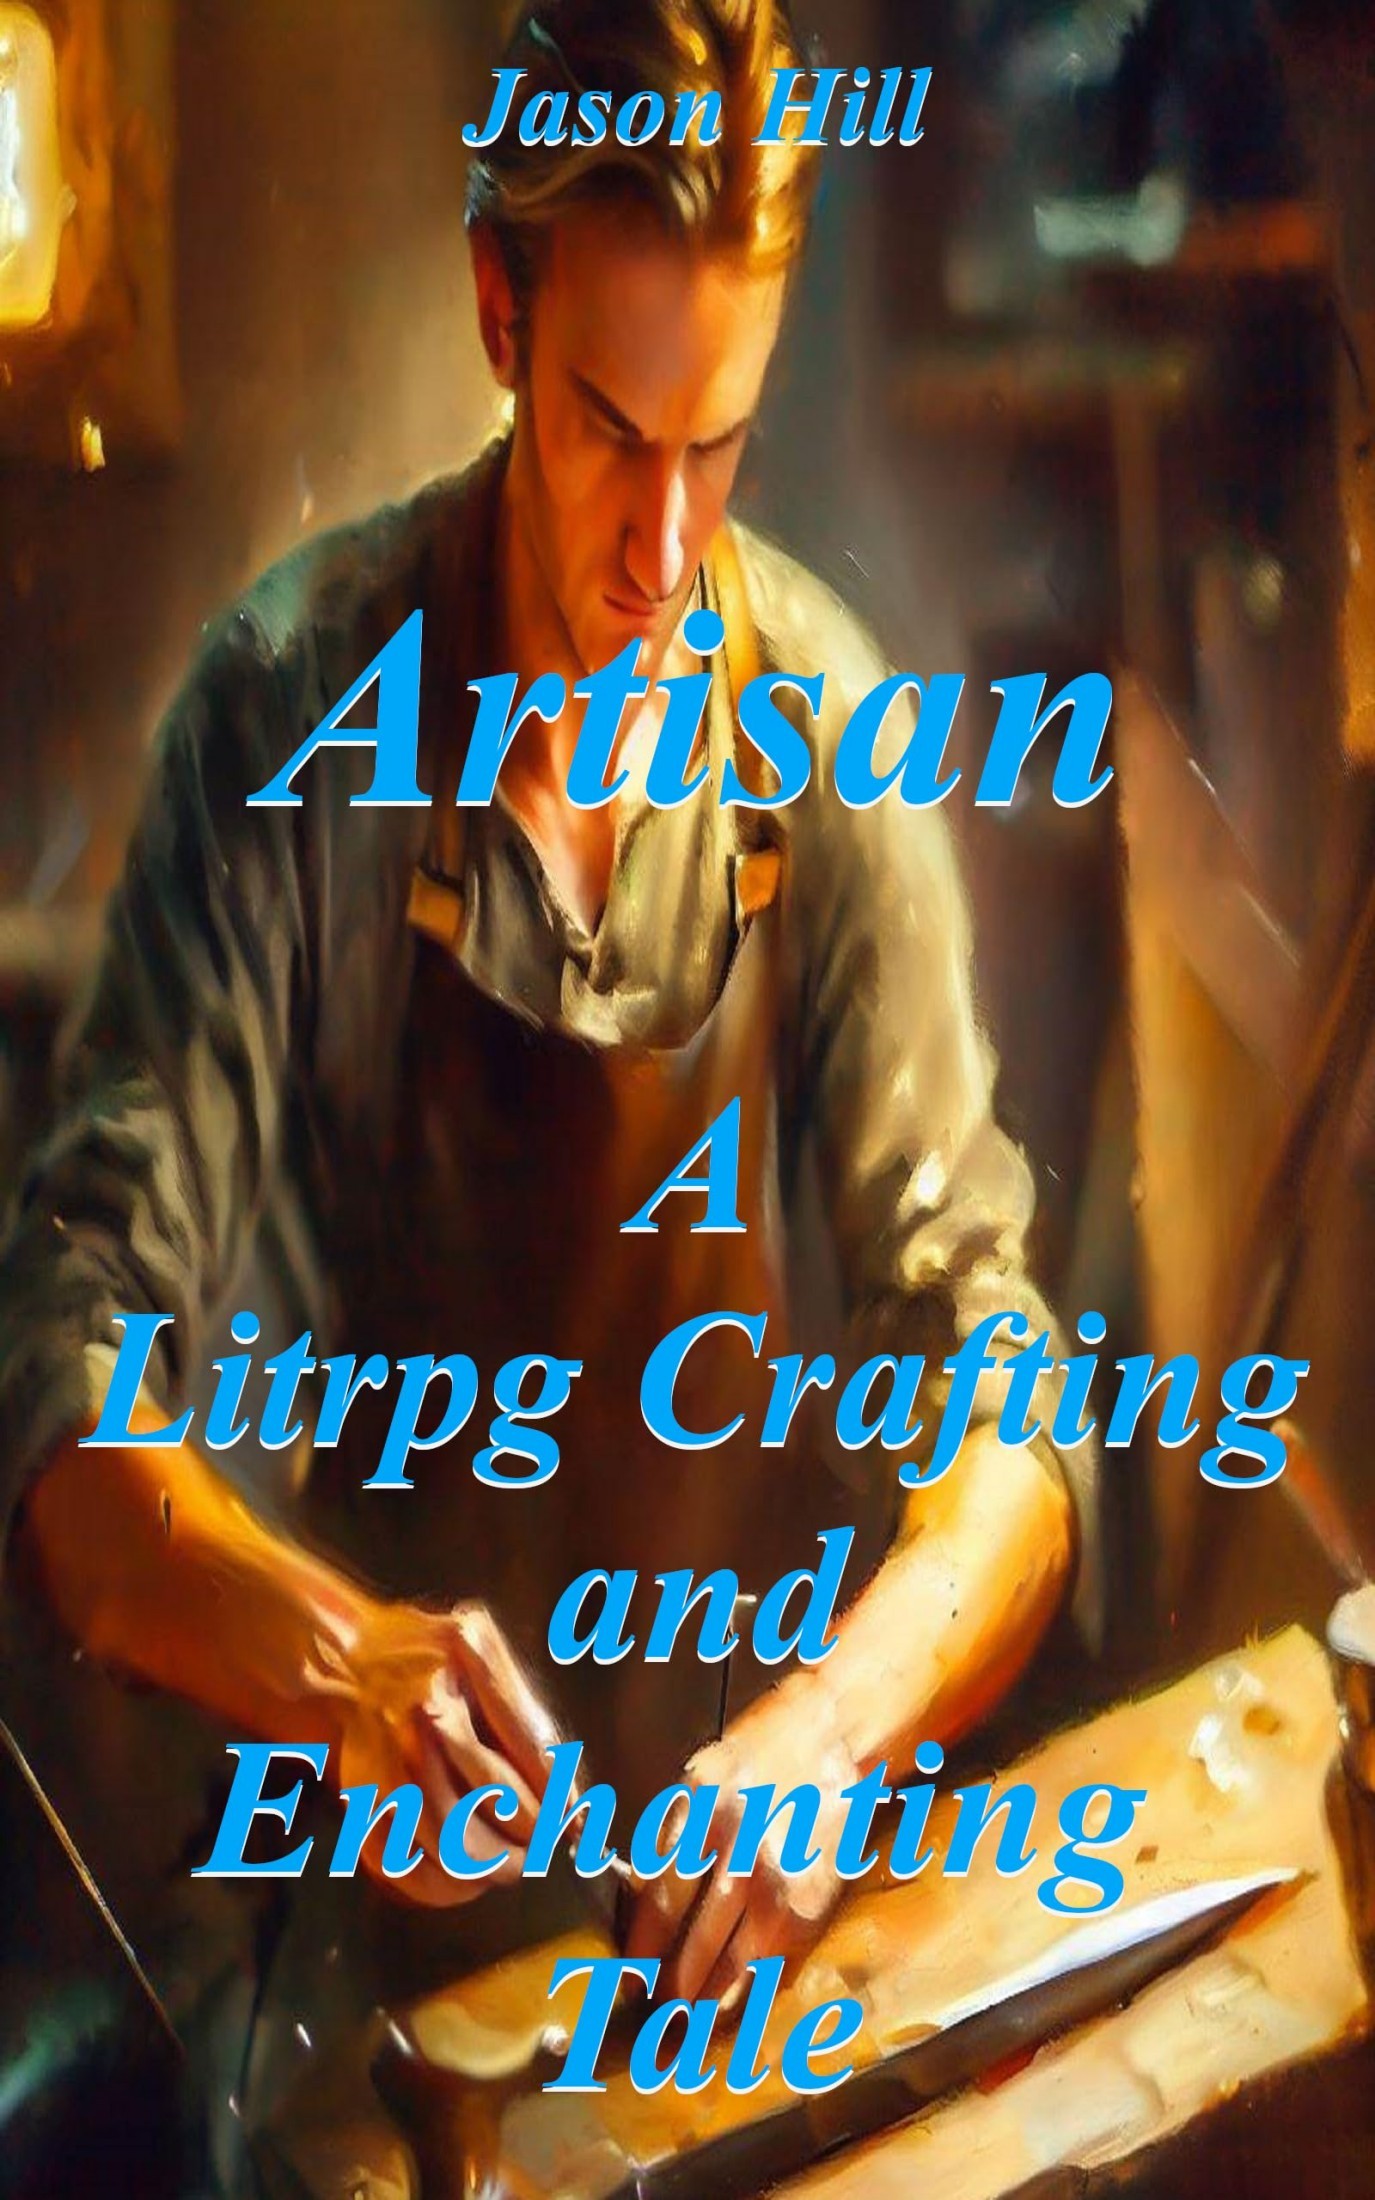 Artisan: A Litrpg Crafting and Enchanting Tale